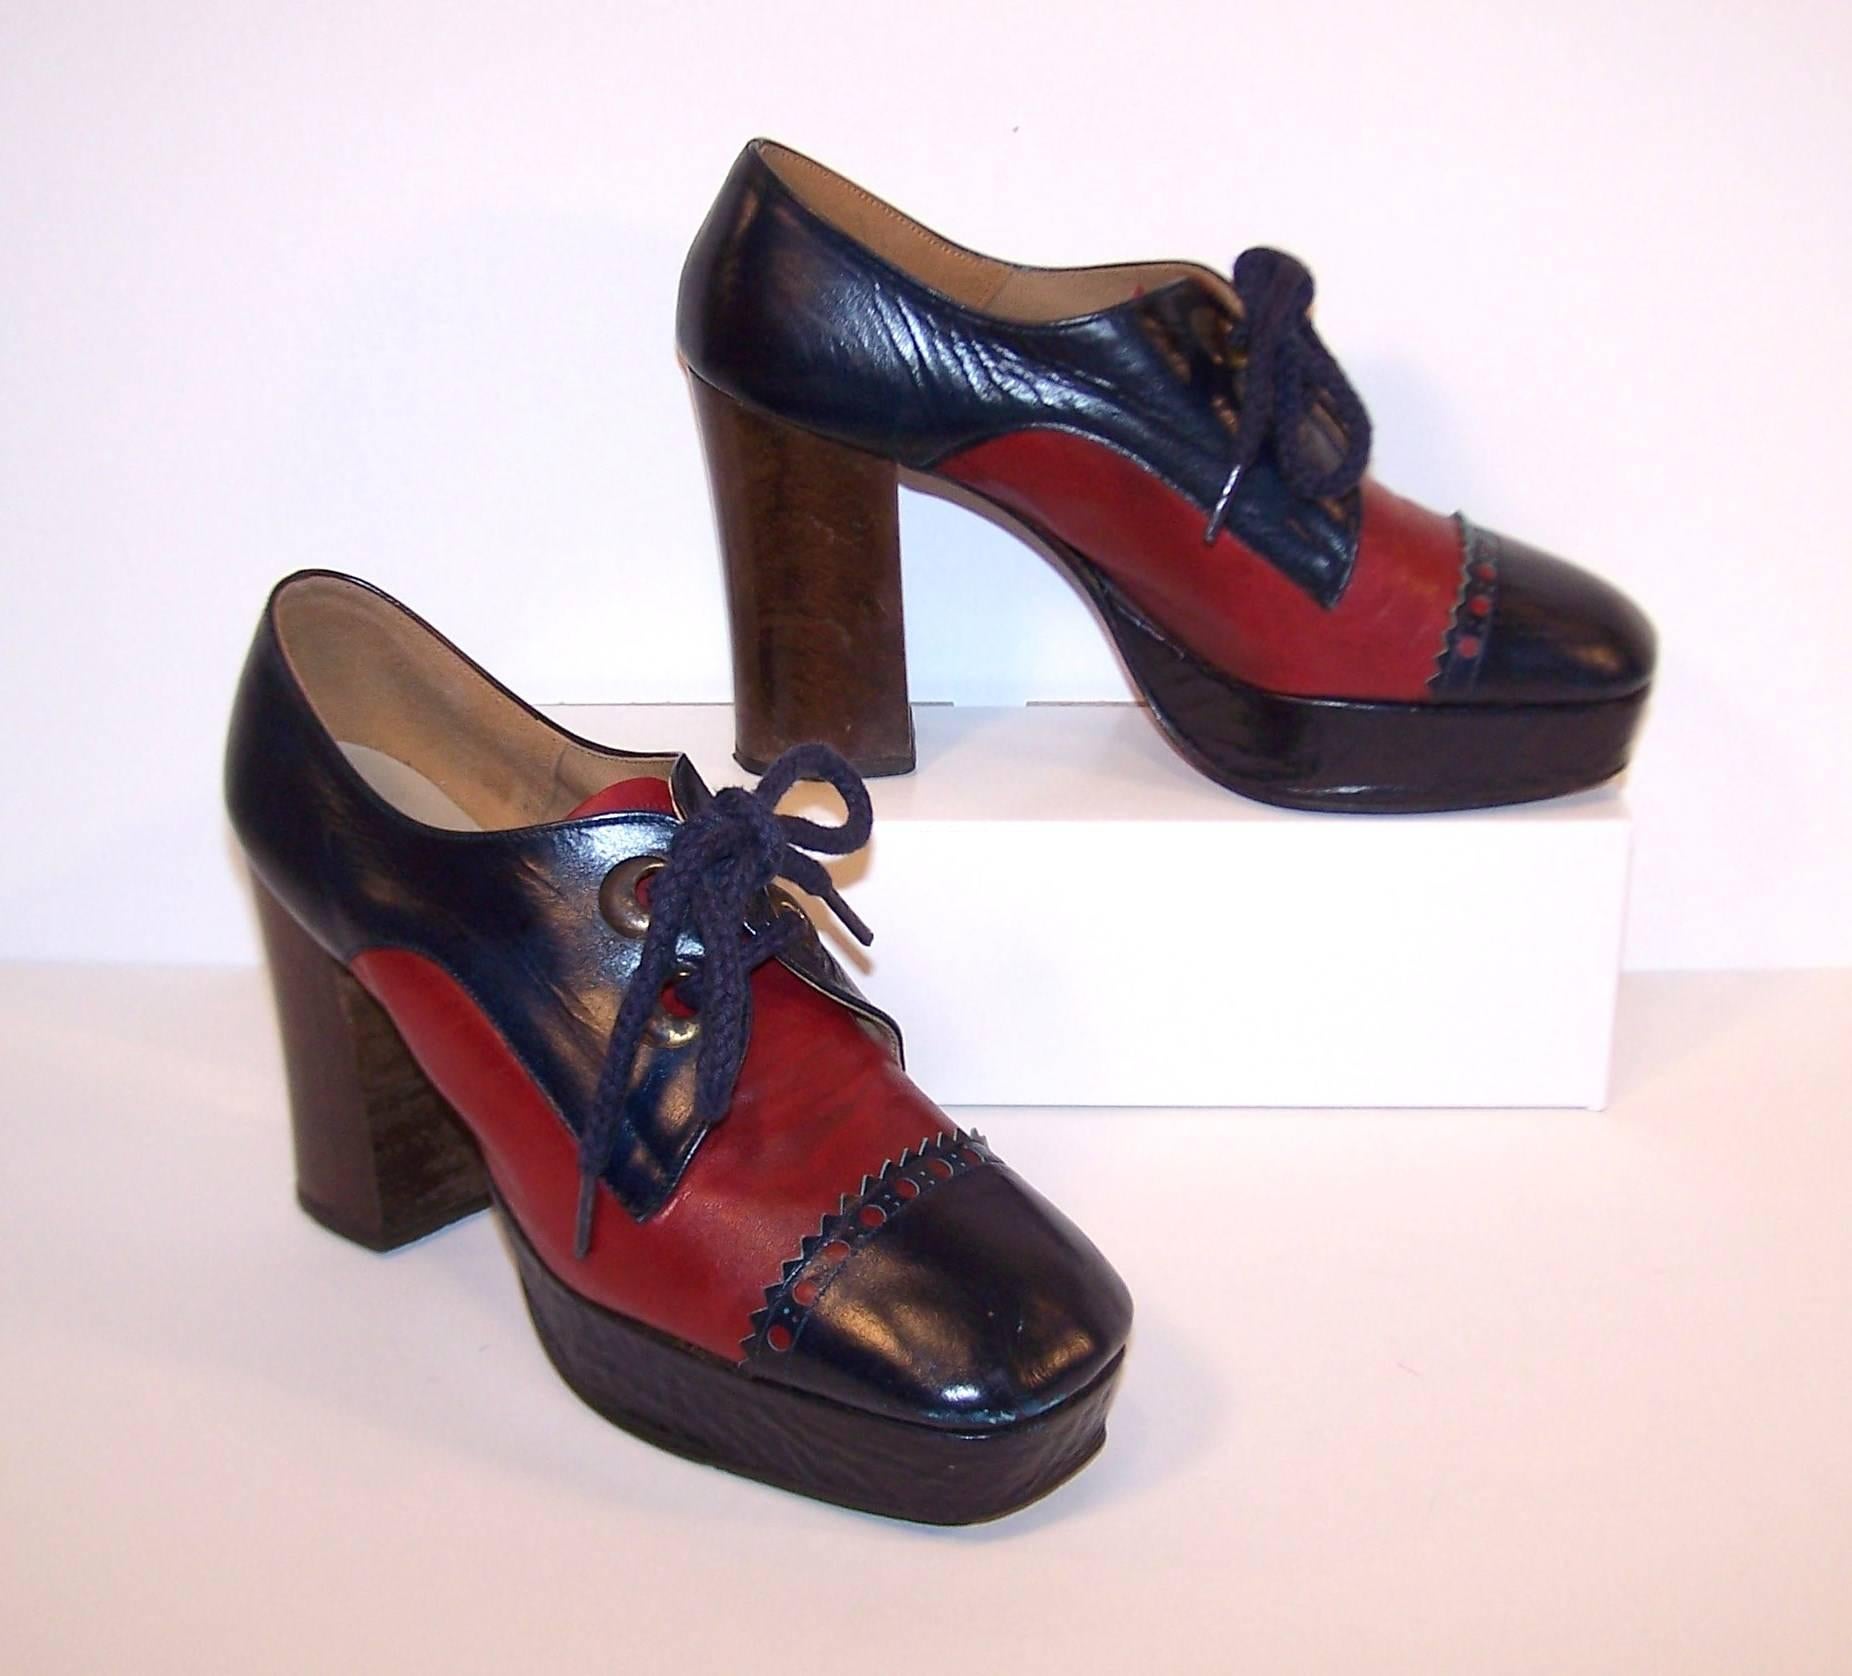 These Nina full leather oxford shoes combine both the fabulous platform look of the 1970's with the old school spectator style of the 1930's.  The two tone color combination of a dark cherry red and navy blue leather are offset by a 4" tall